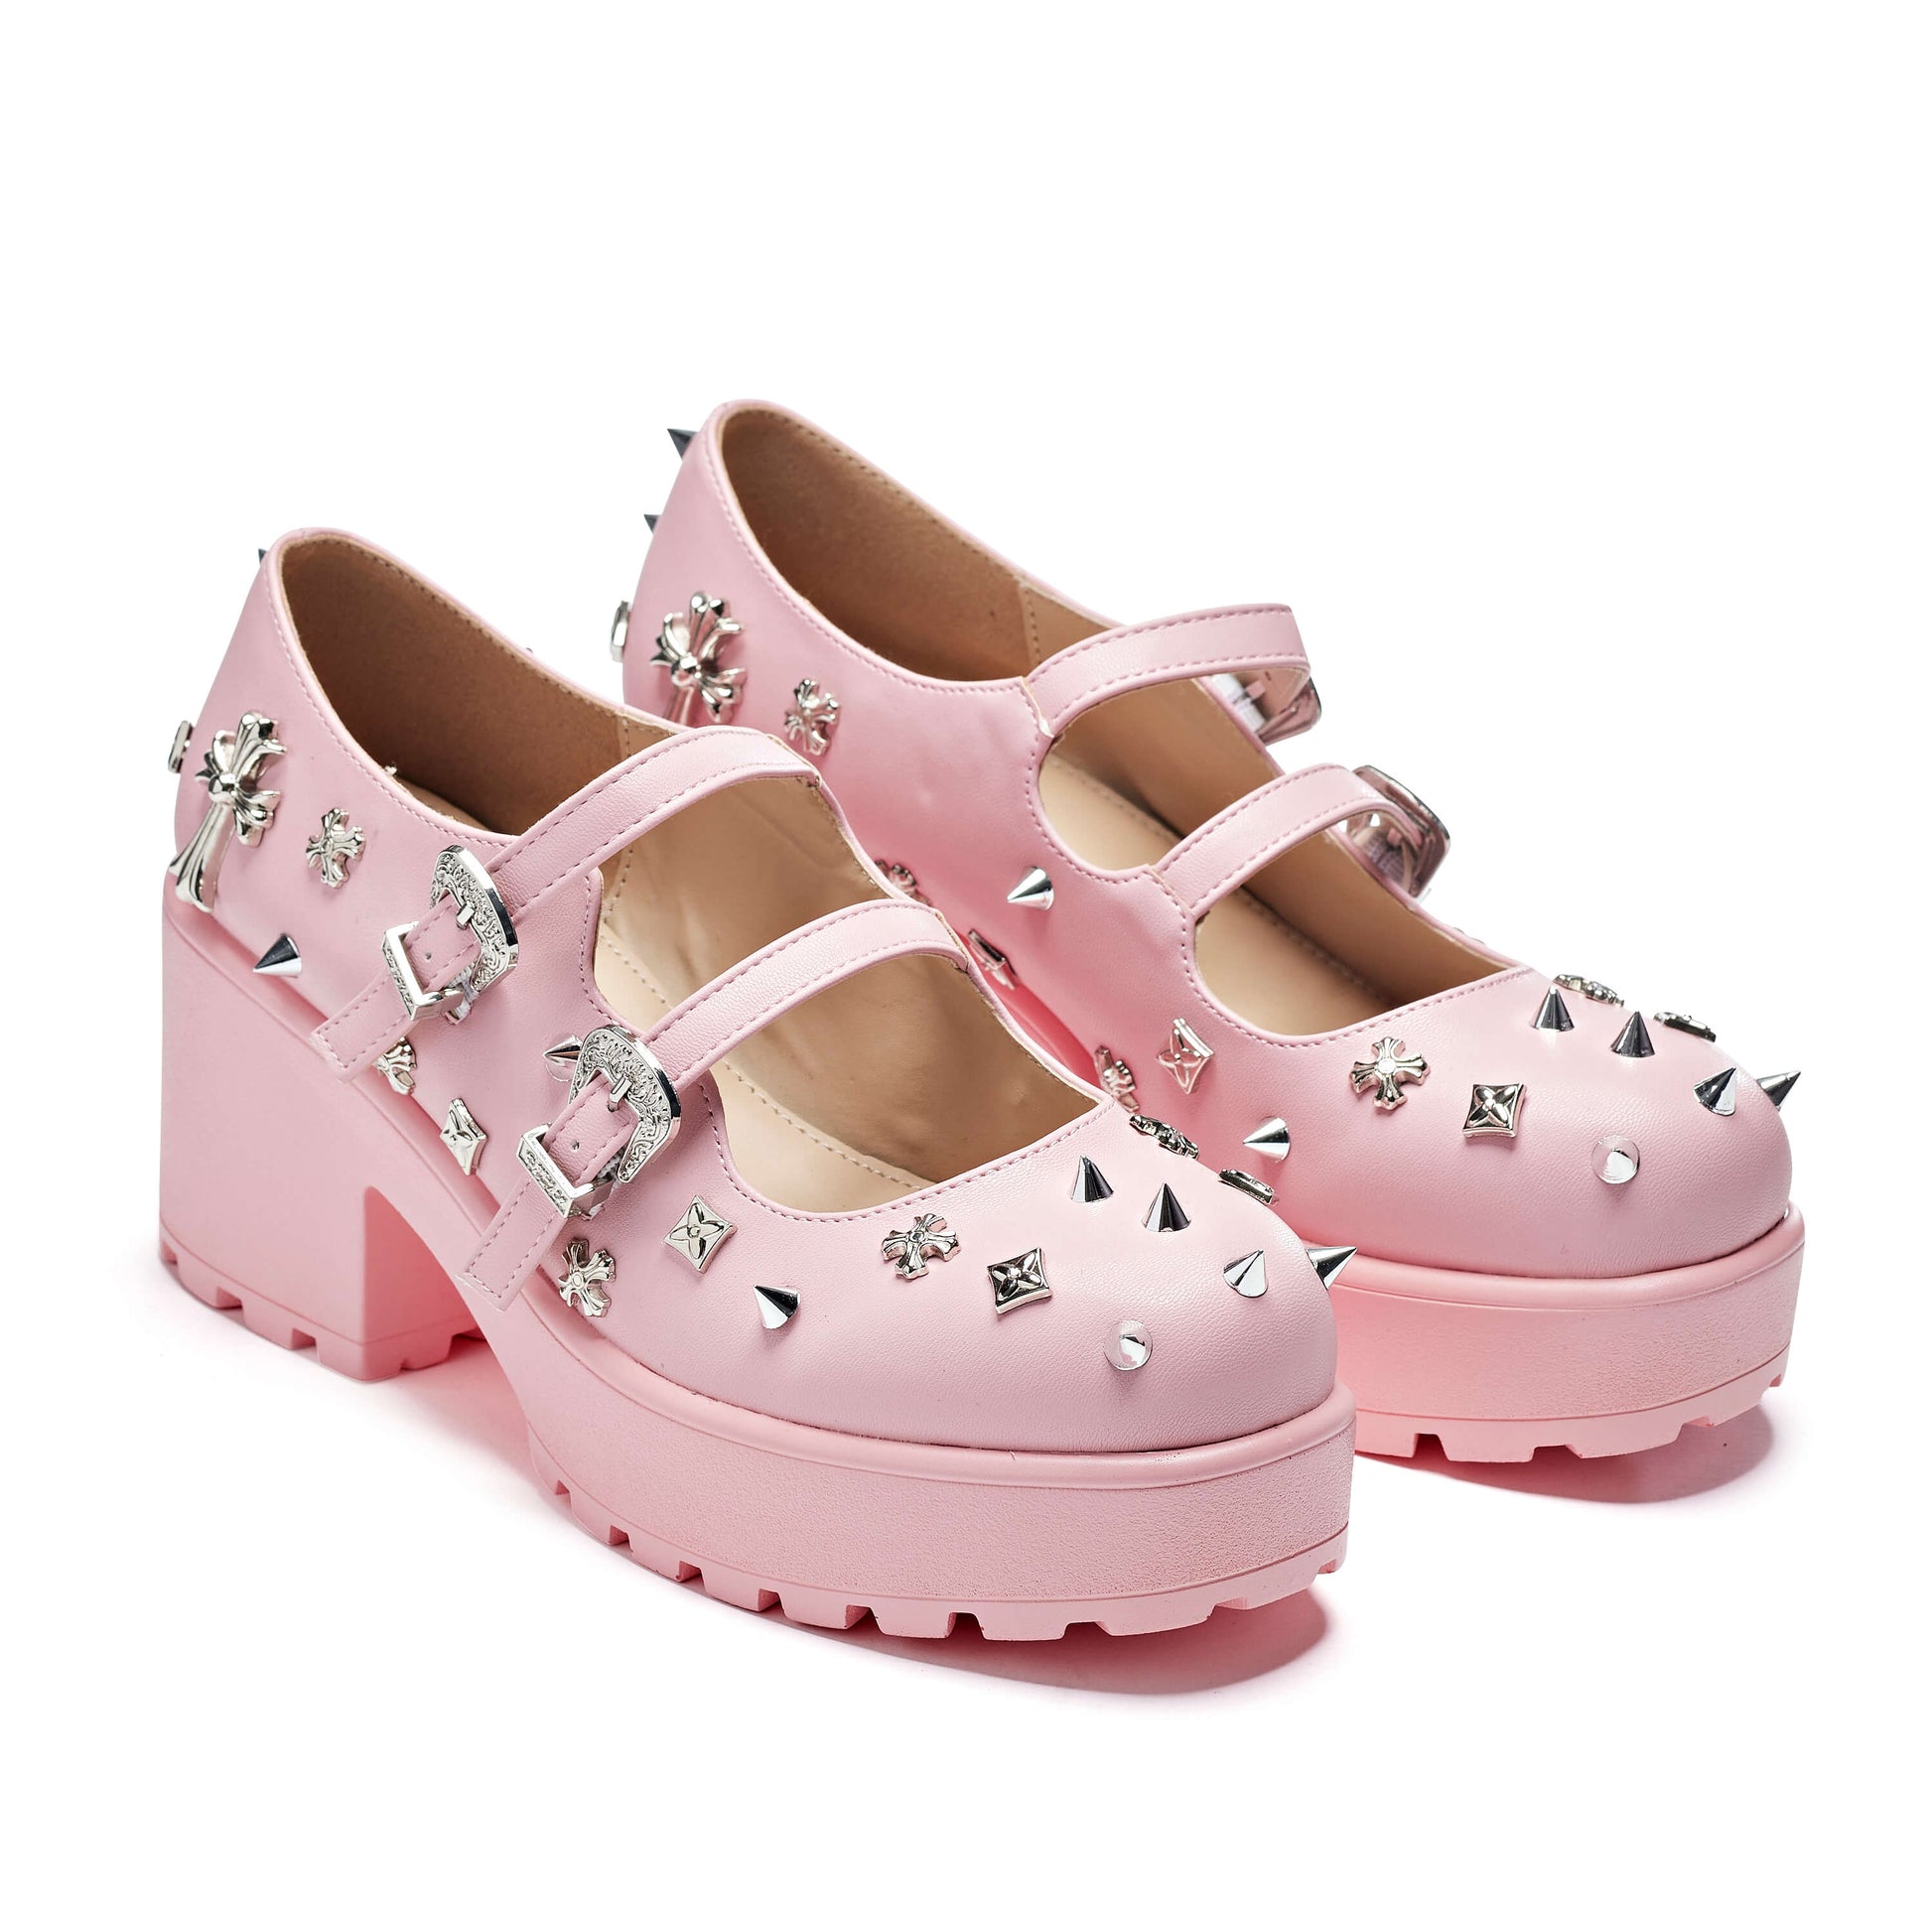 Devil Blushes Double Strap Mary Jane Shoes - Mary Janes - KOI Footwear - Pink - Three-Quarter View